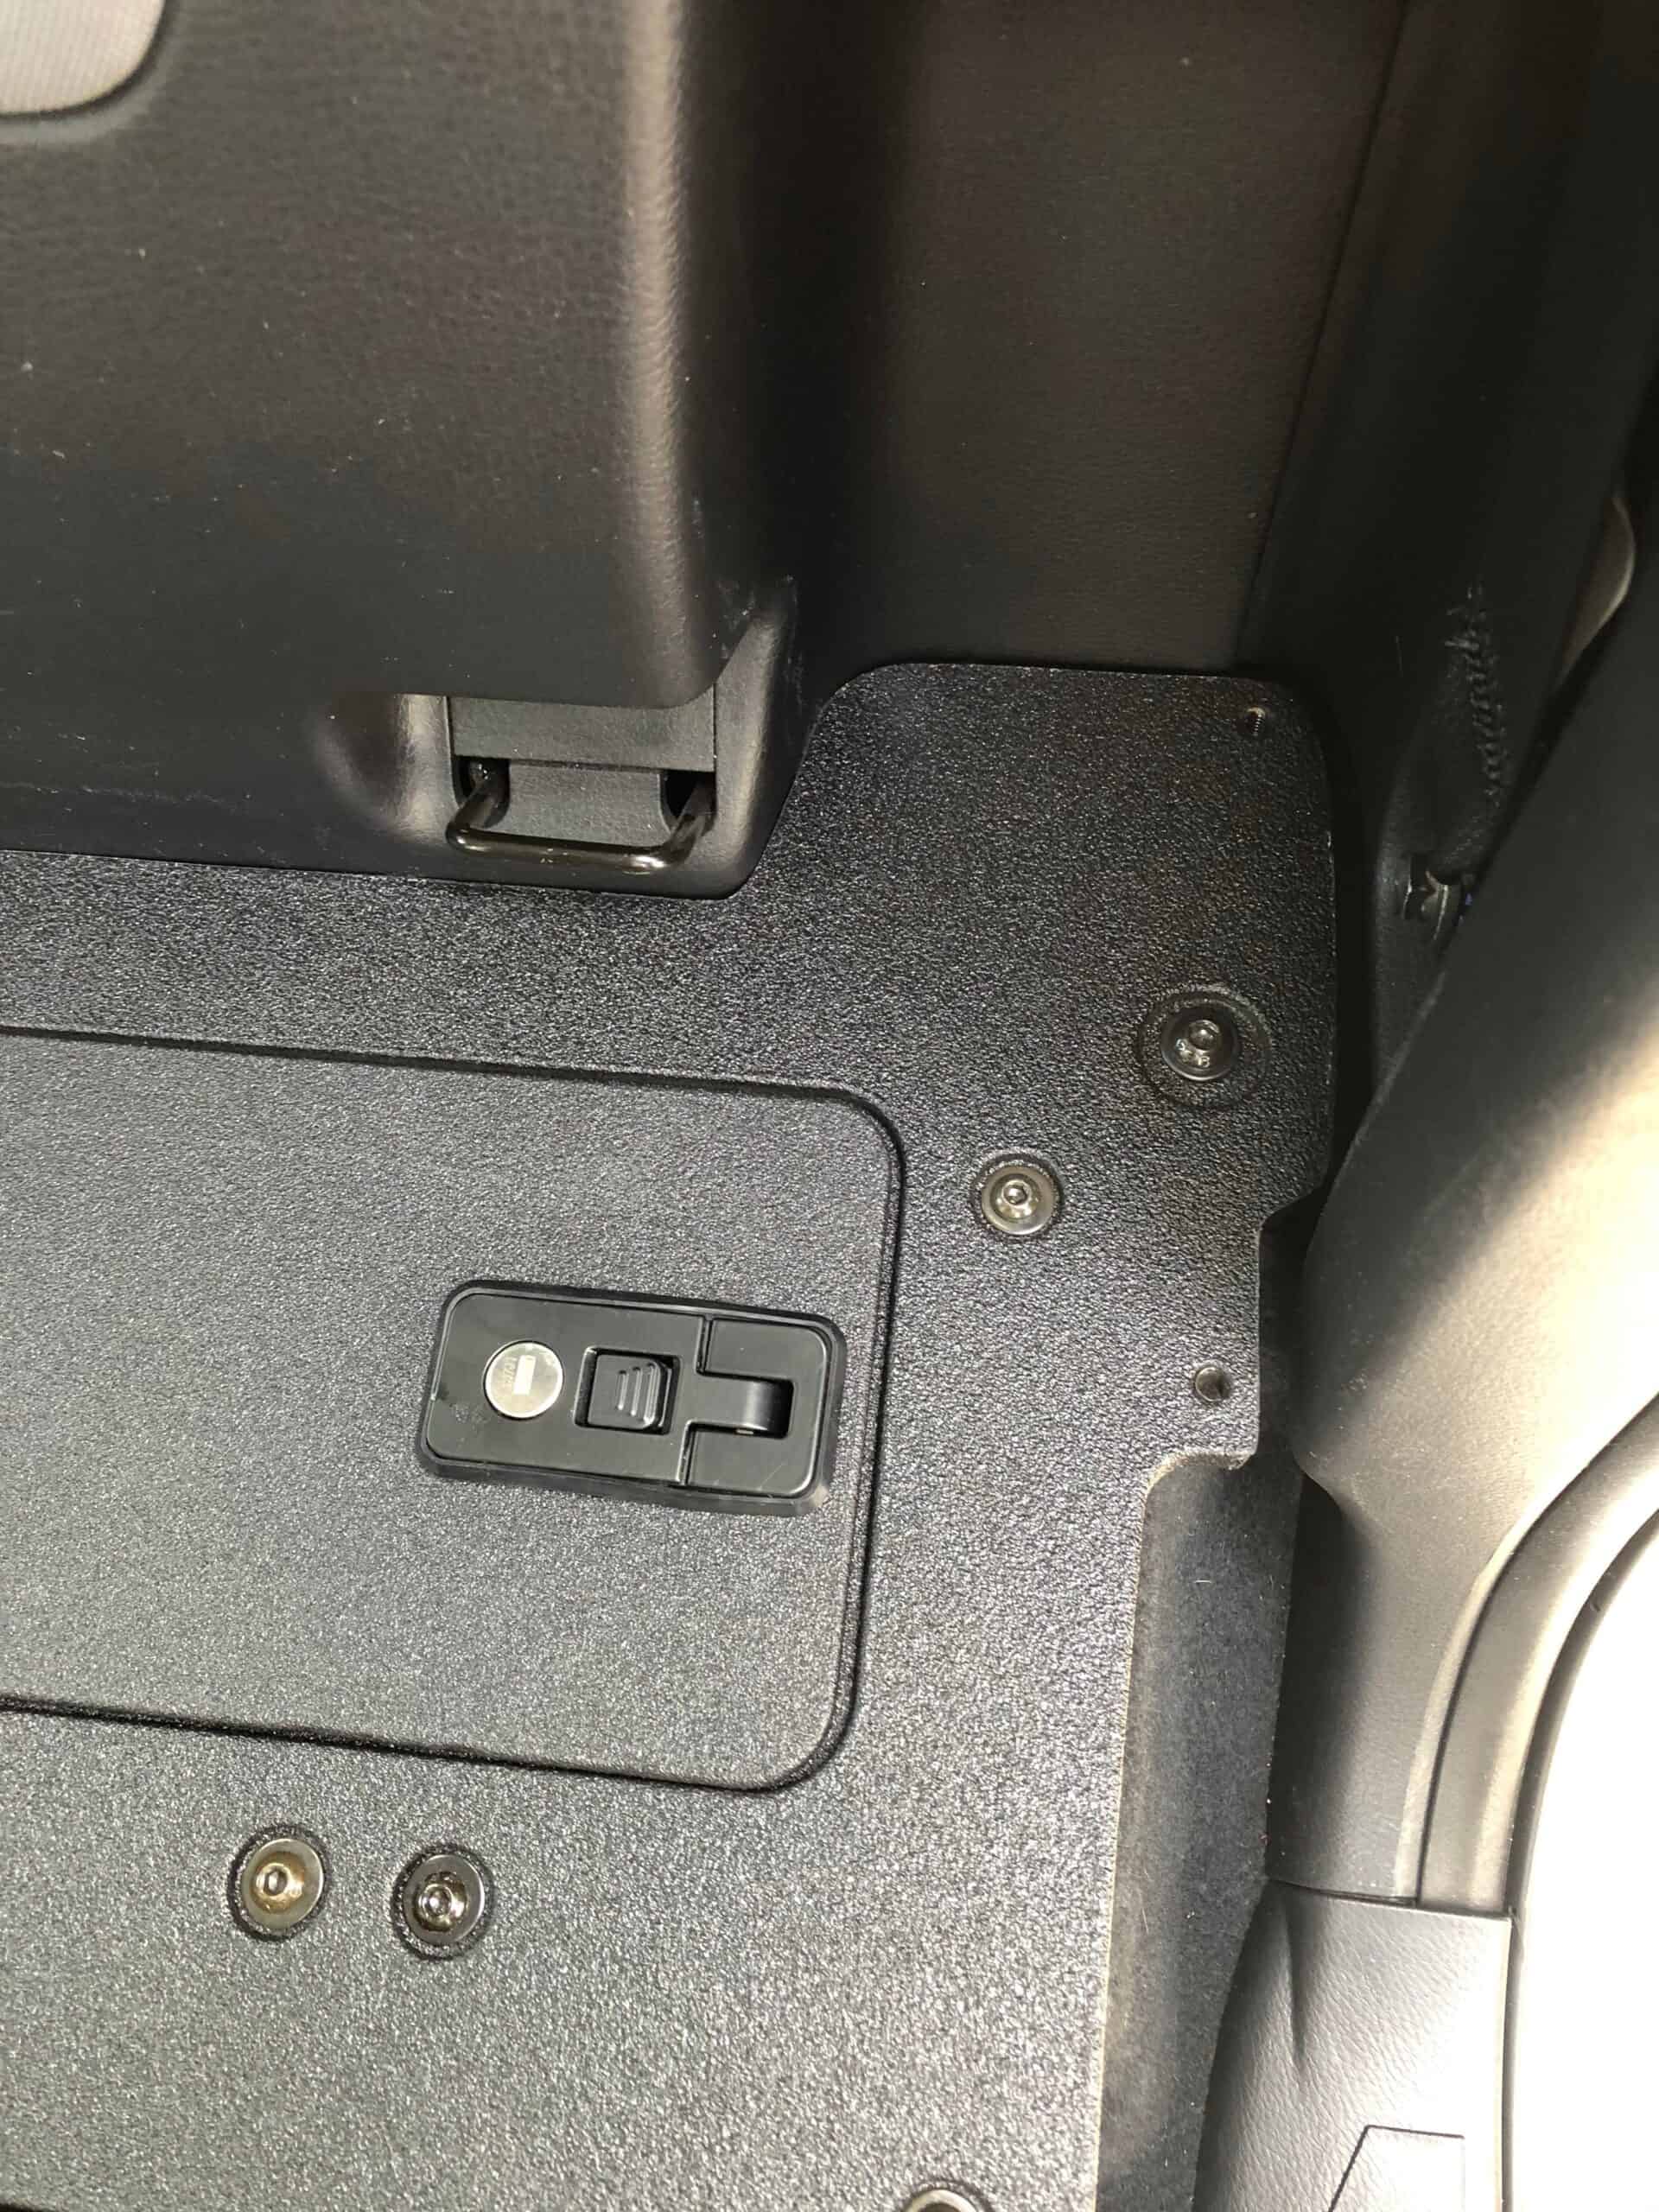 Toyota Tacoma 2016-Present 3rd Gen. Access Cab with Factory Seats - Second Row Seat Delete Plate System